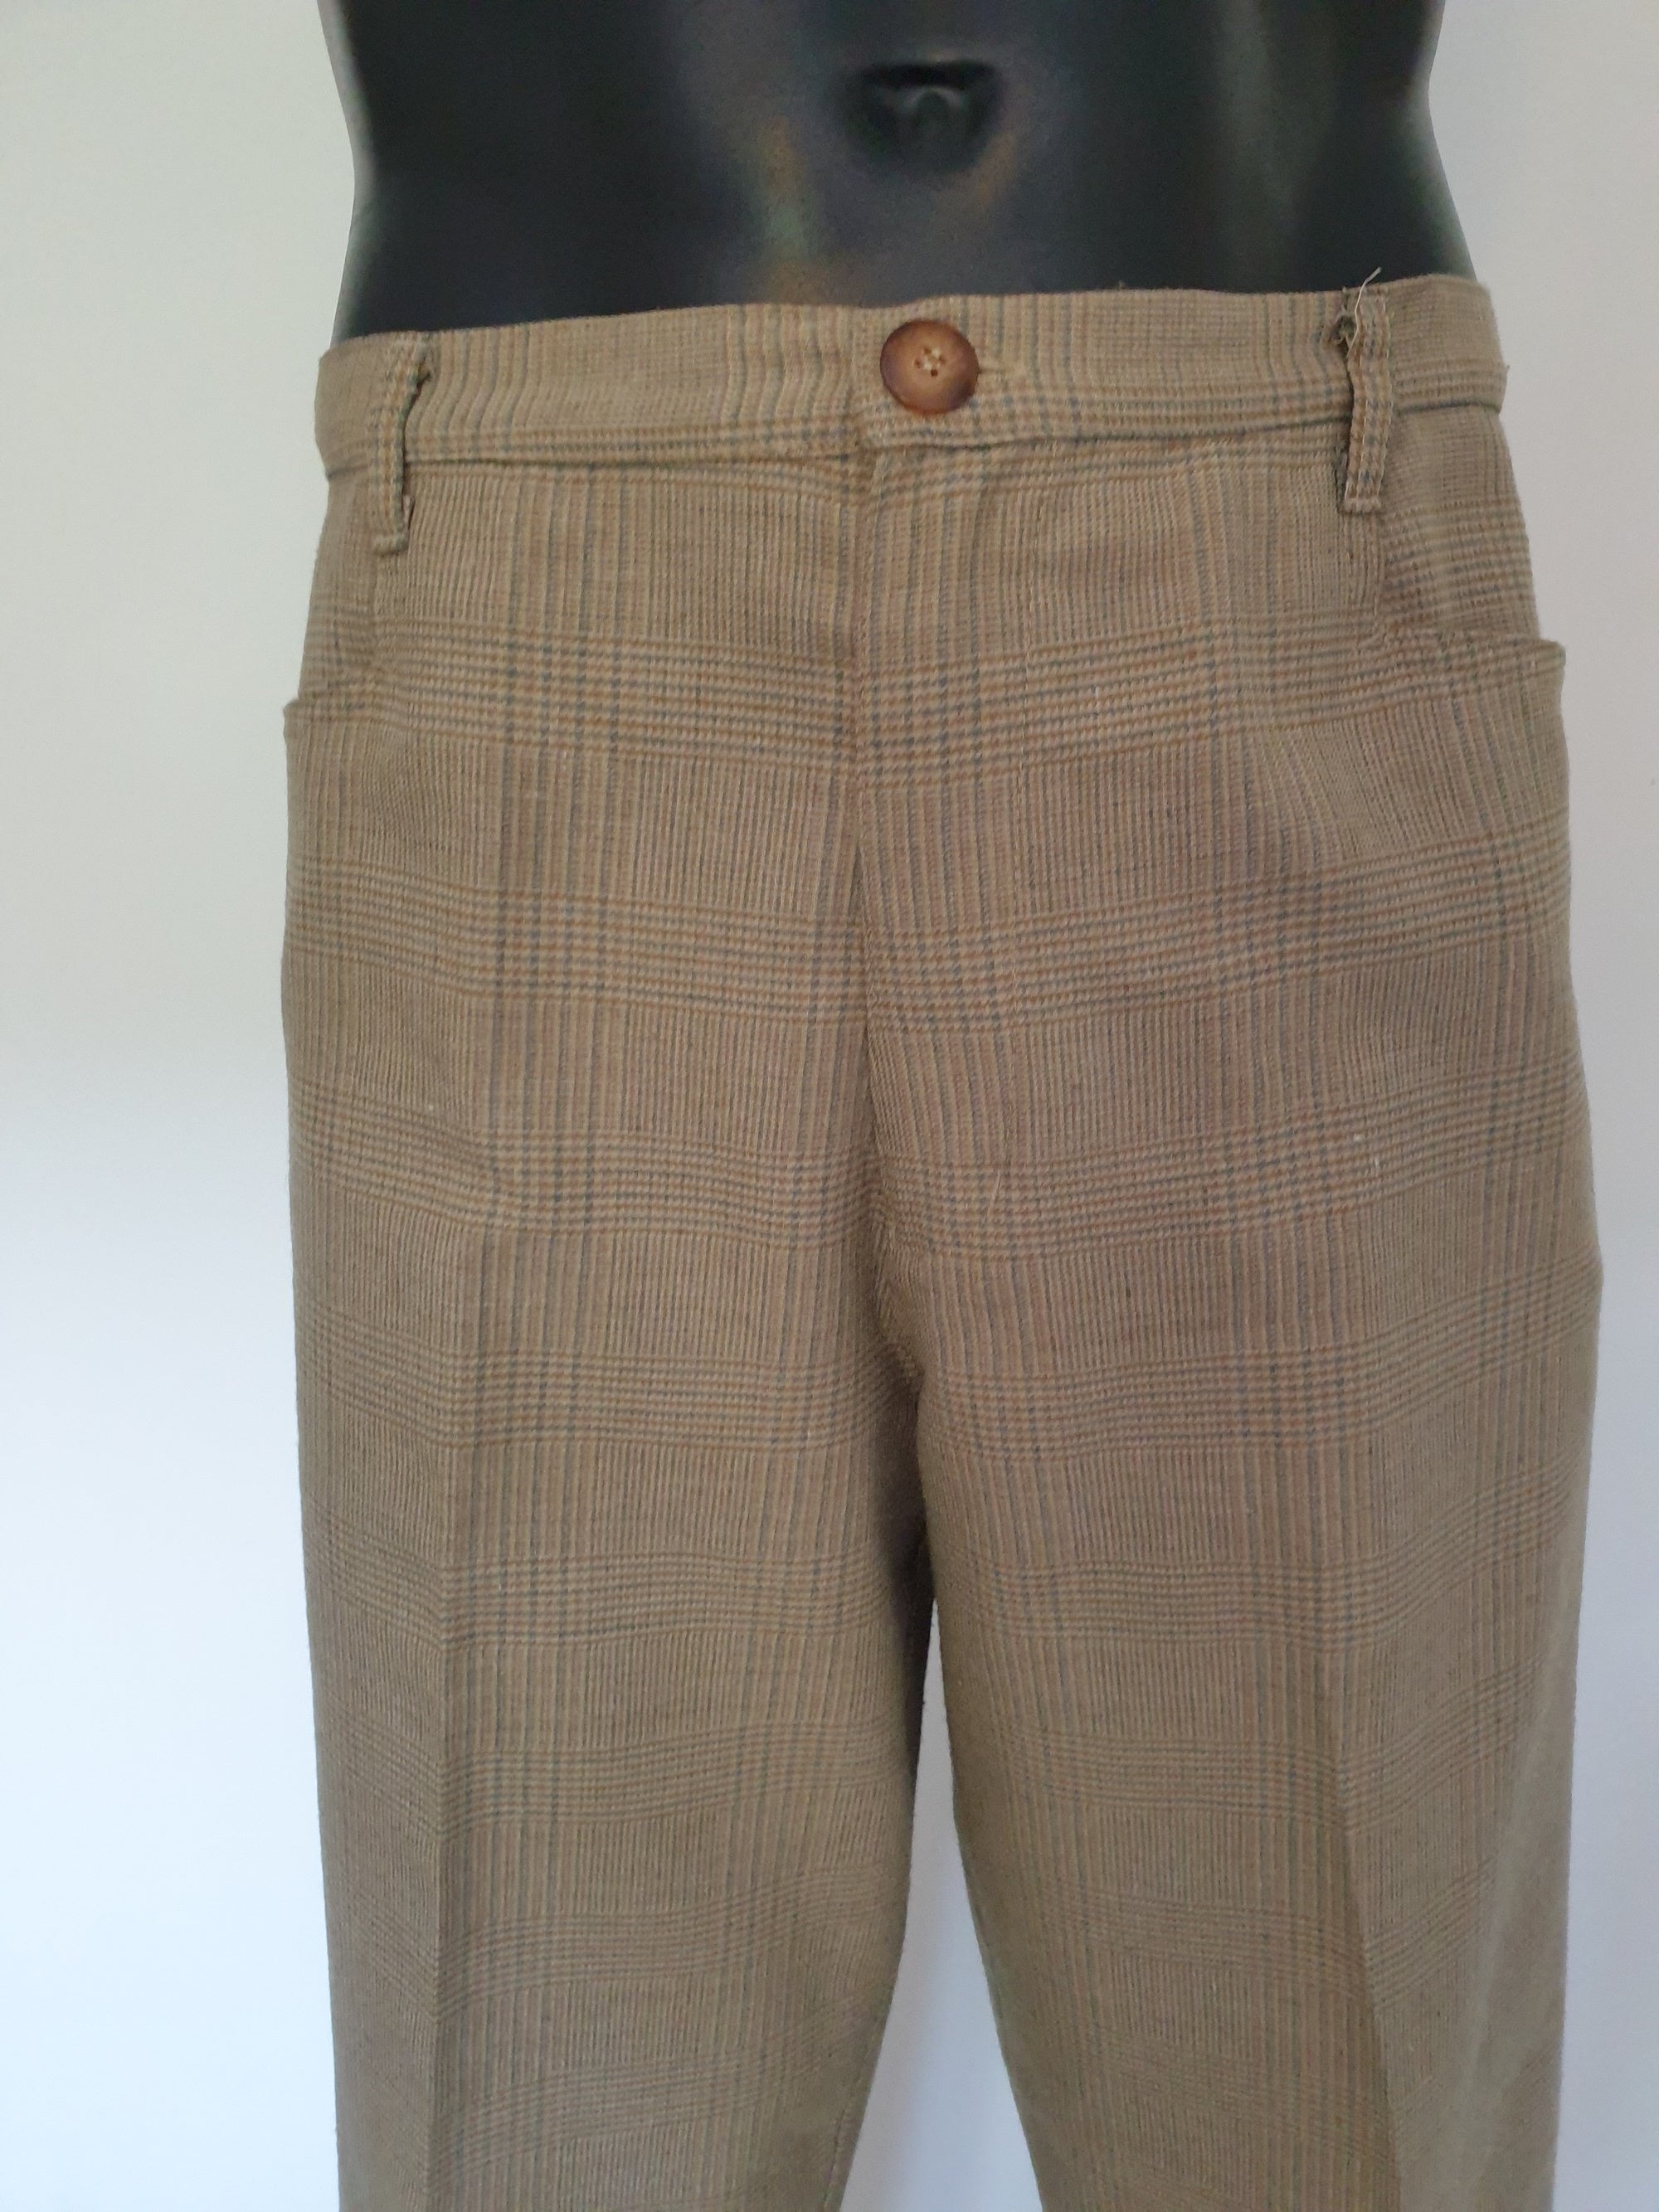 1980s vintage beige check golf pants by planet golf extra large